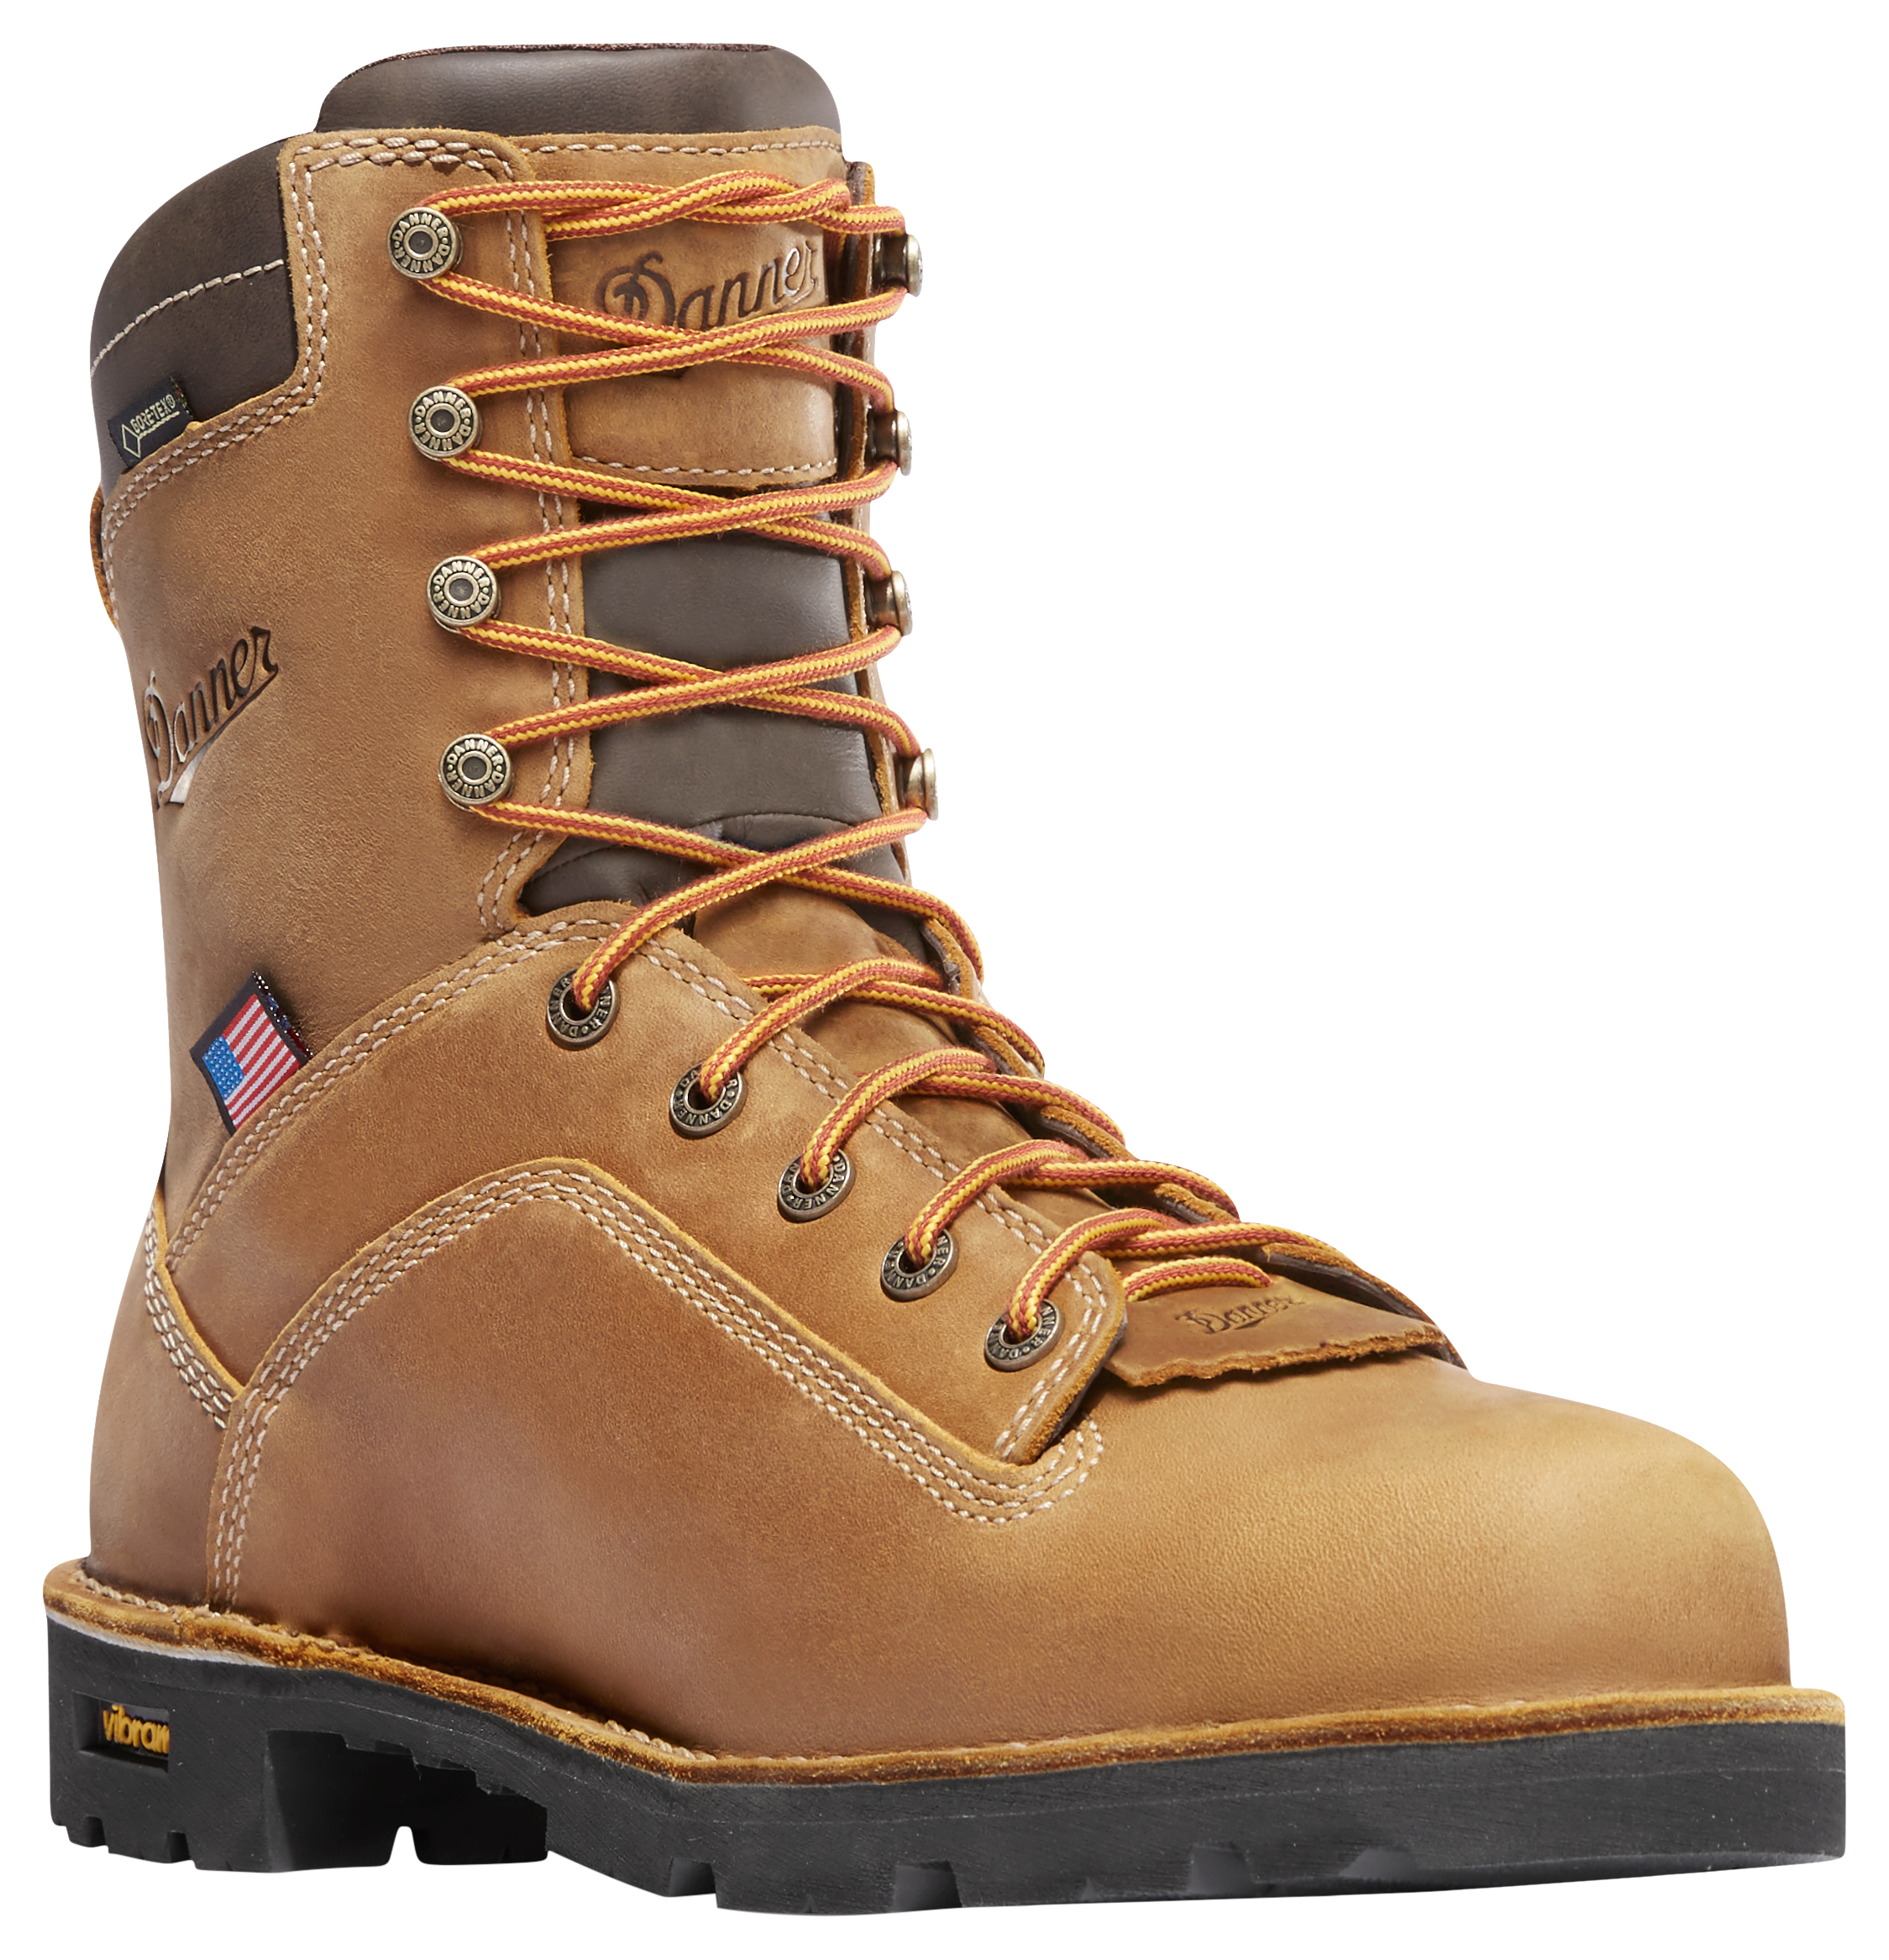 Danner Quarry USA GORE-TEX Insulated Composite Toe Work Boots for Men - Distressed Brown -  11.5M